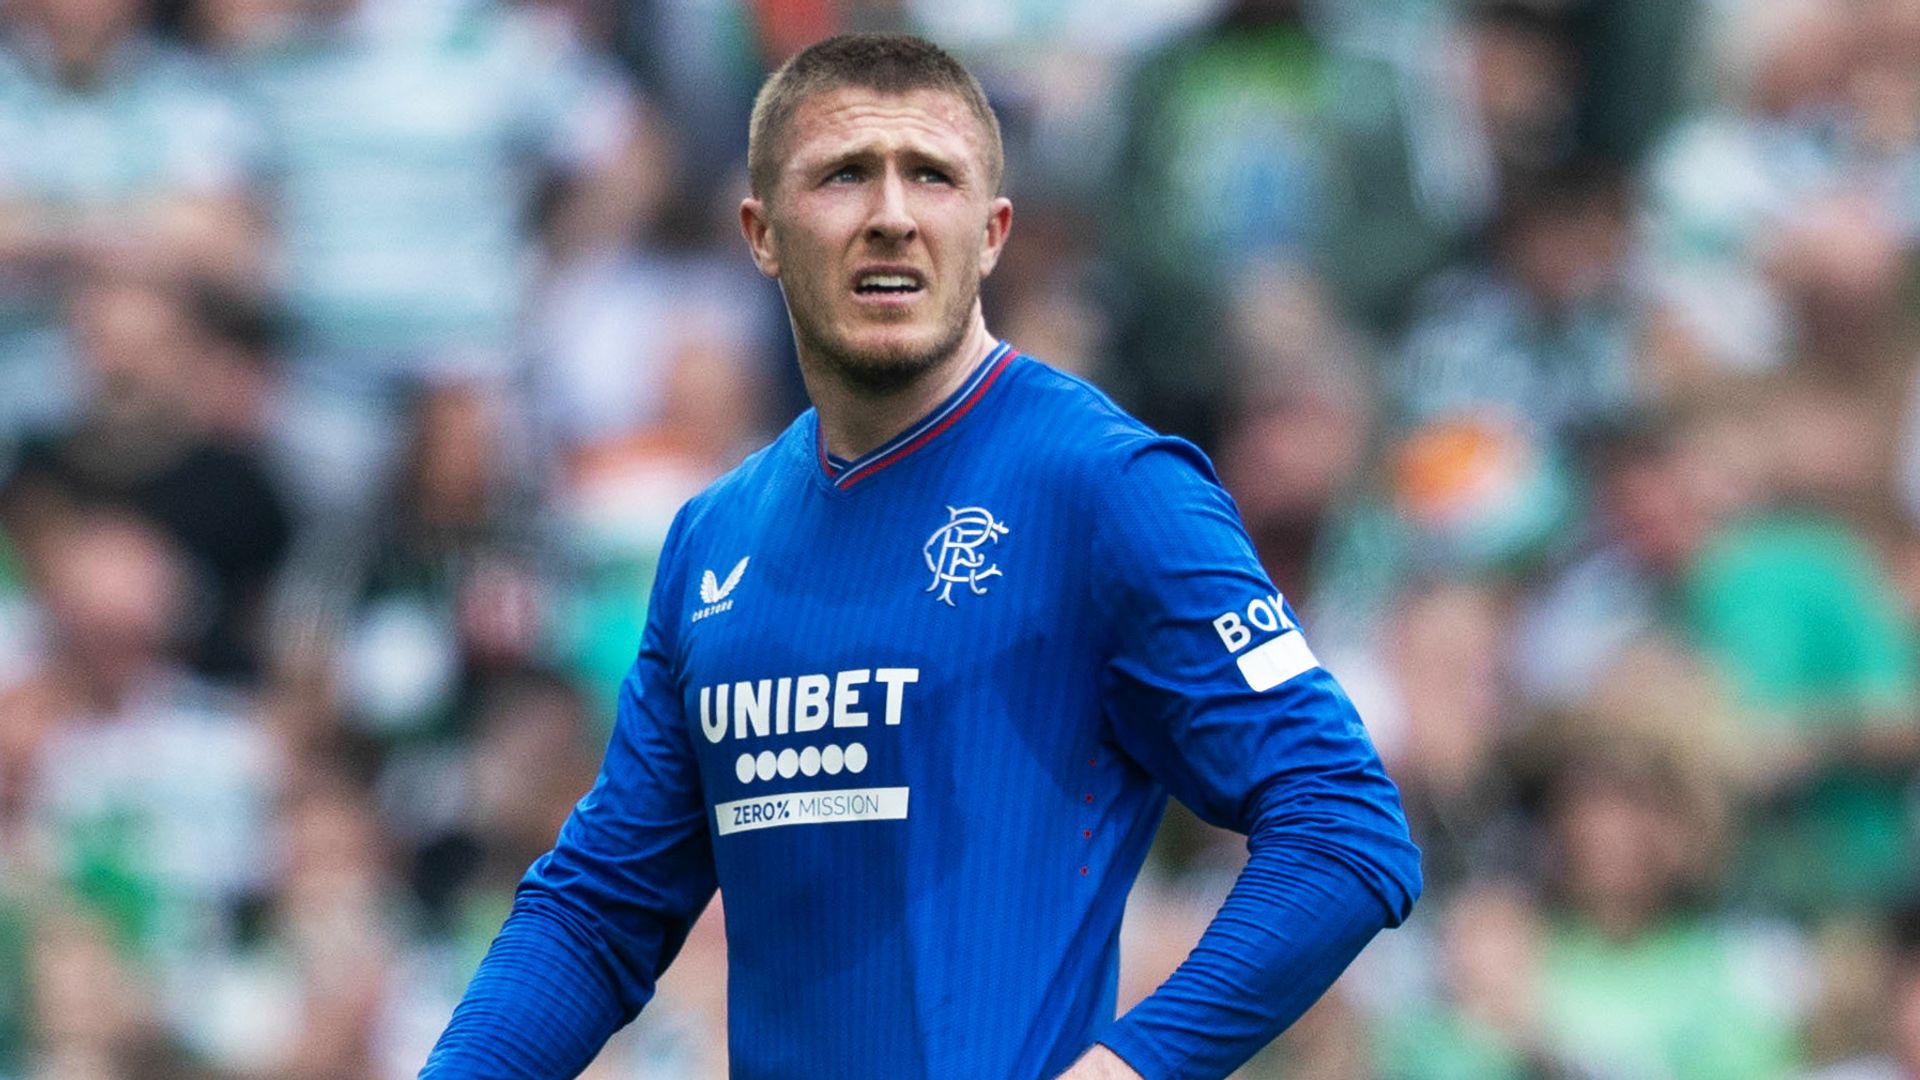 Was Lundstram's red card against Celtic deserved? Have your say!